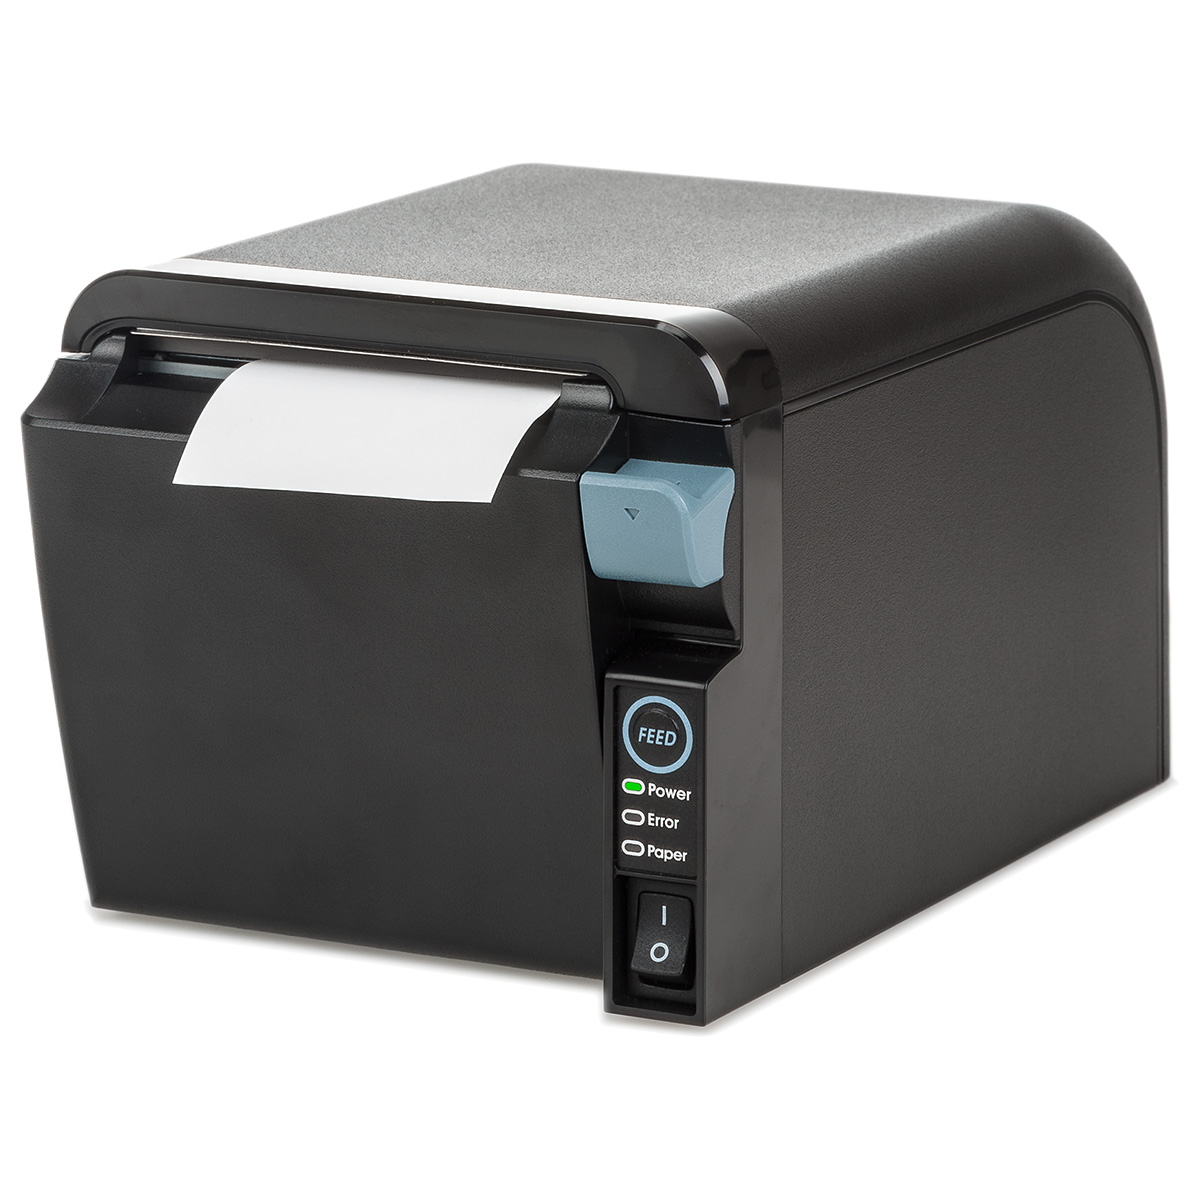 Witschi thermal printer (Bluetooth option through additional accessories)